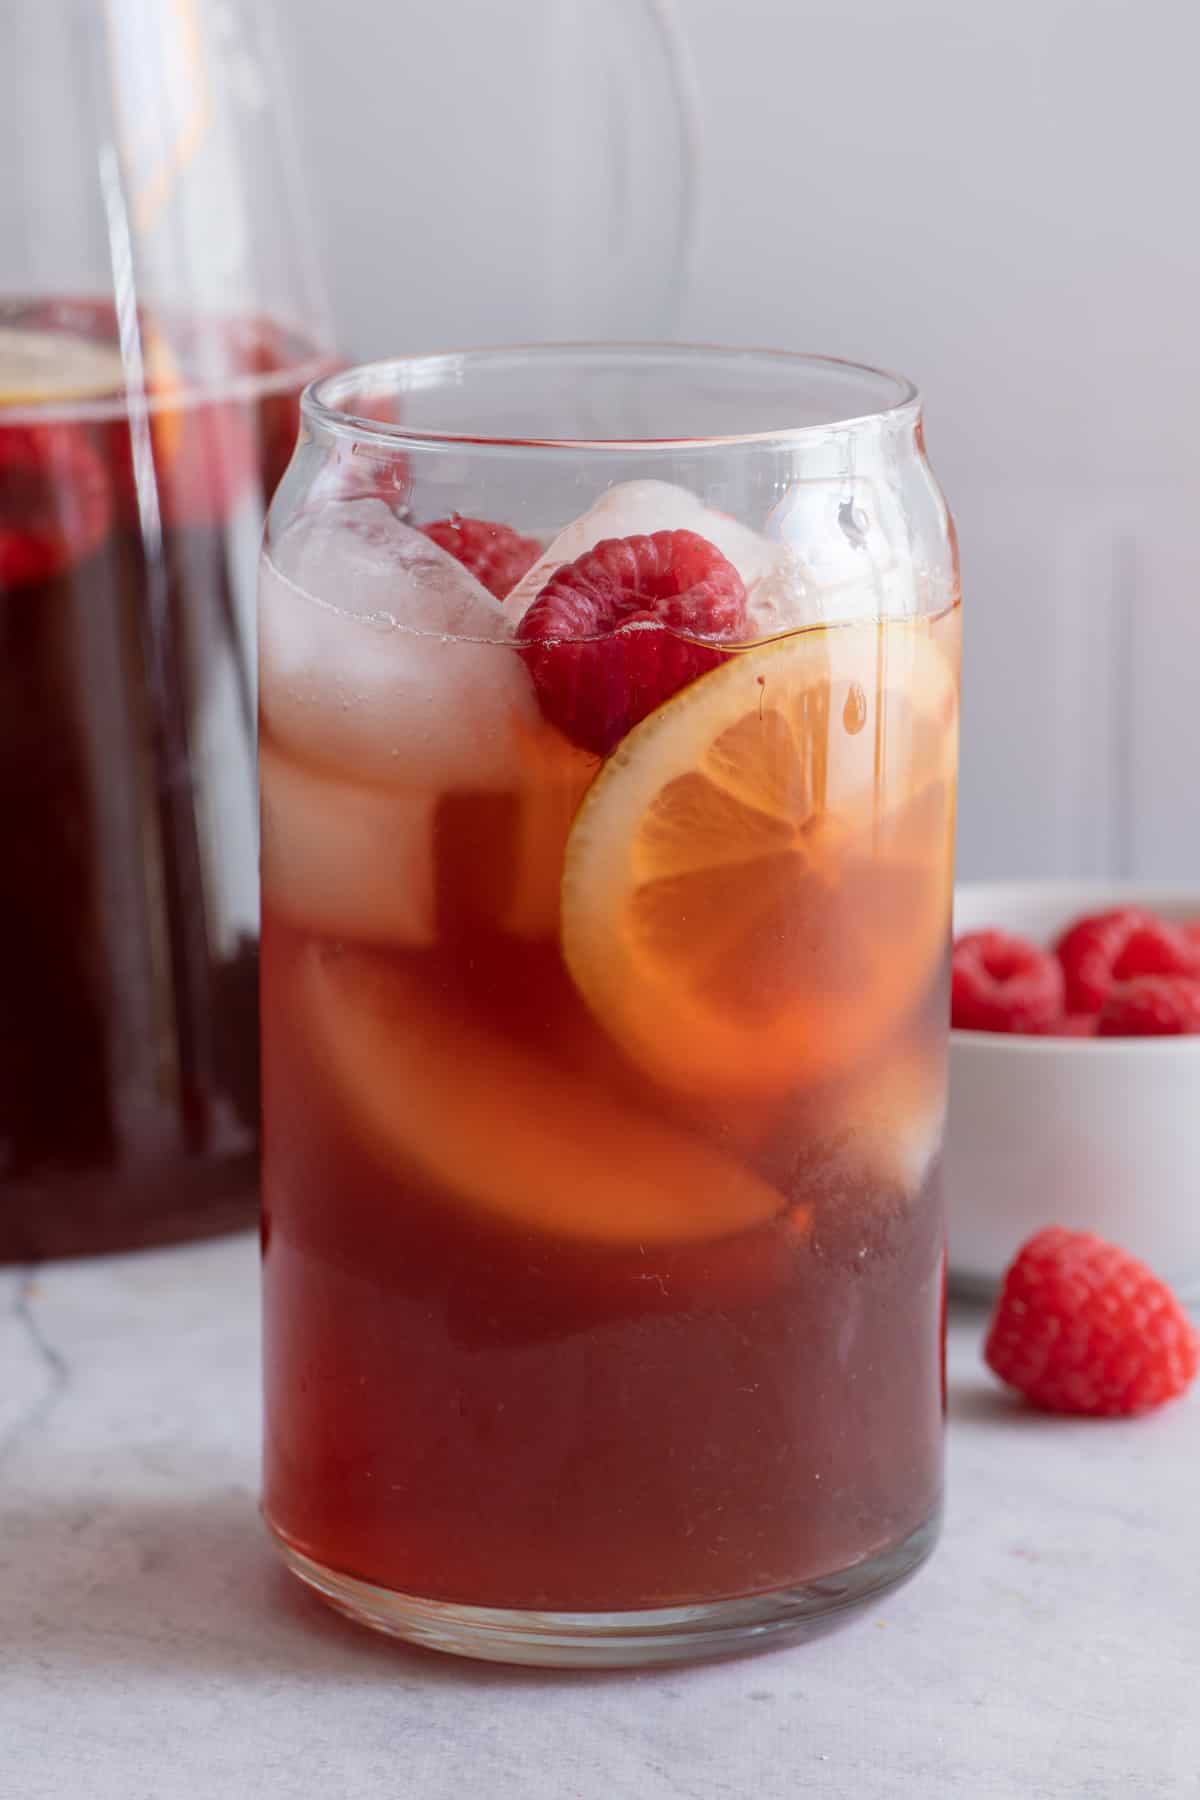 Large glass of raspberry iced tea with fresh cut lemons and raspberries and the pitcher of tea sitting behind.